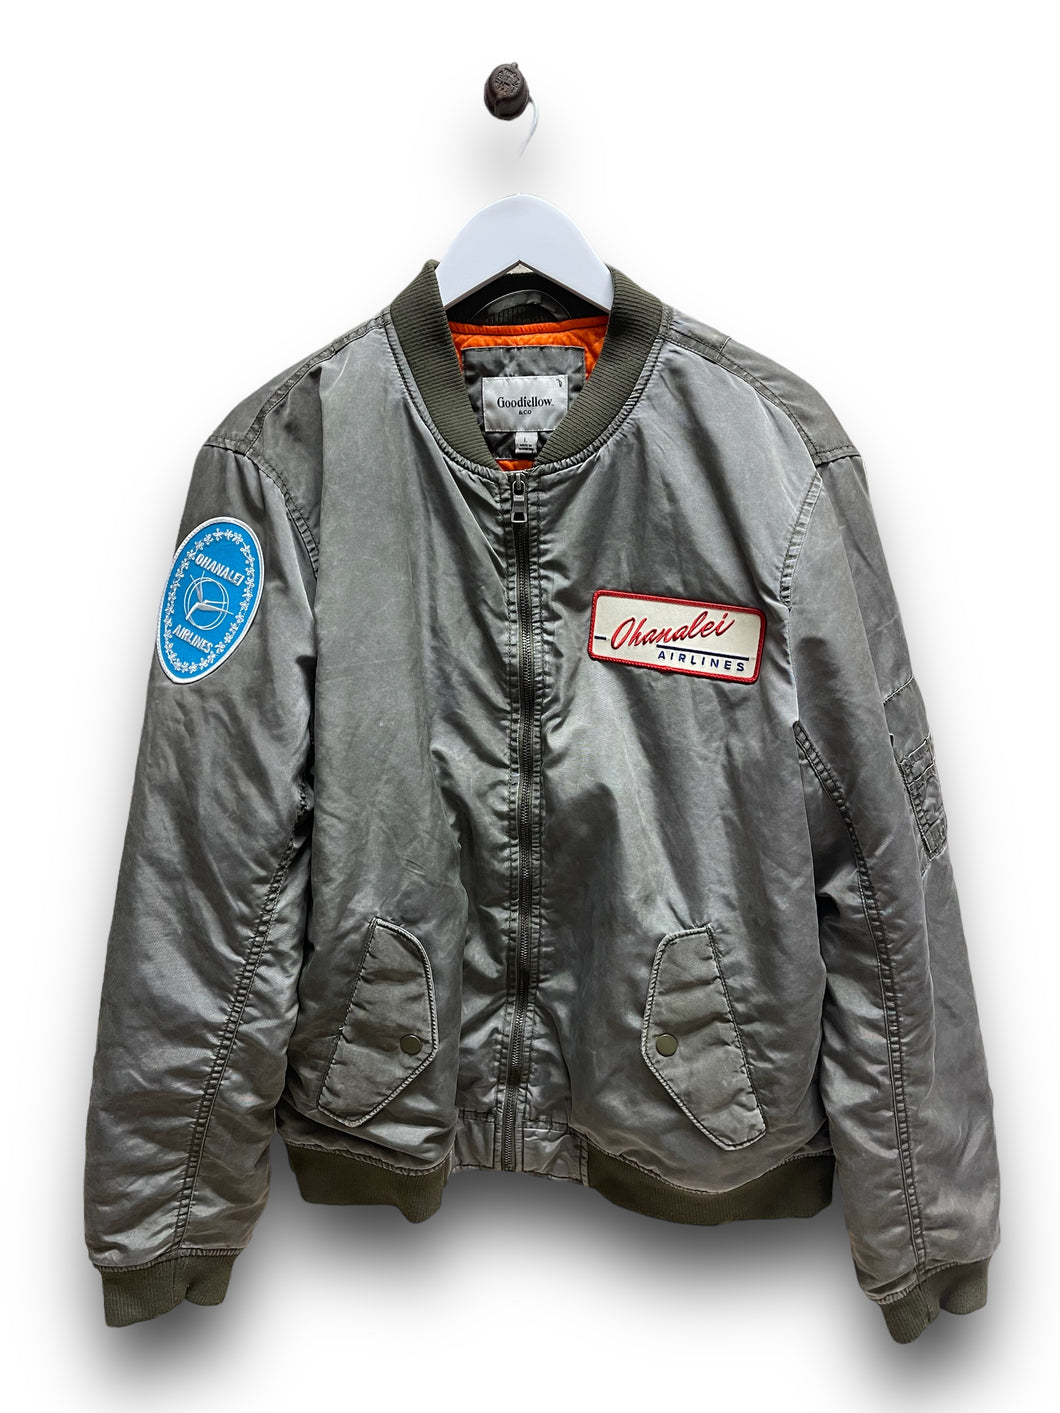 Ohanalei Vintage - Bomber Jacket with Ohanalei Air Patches